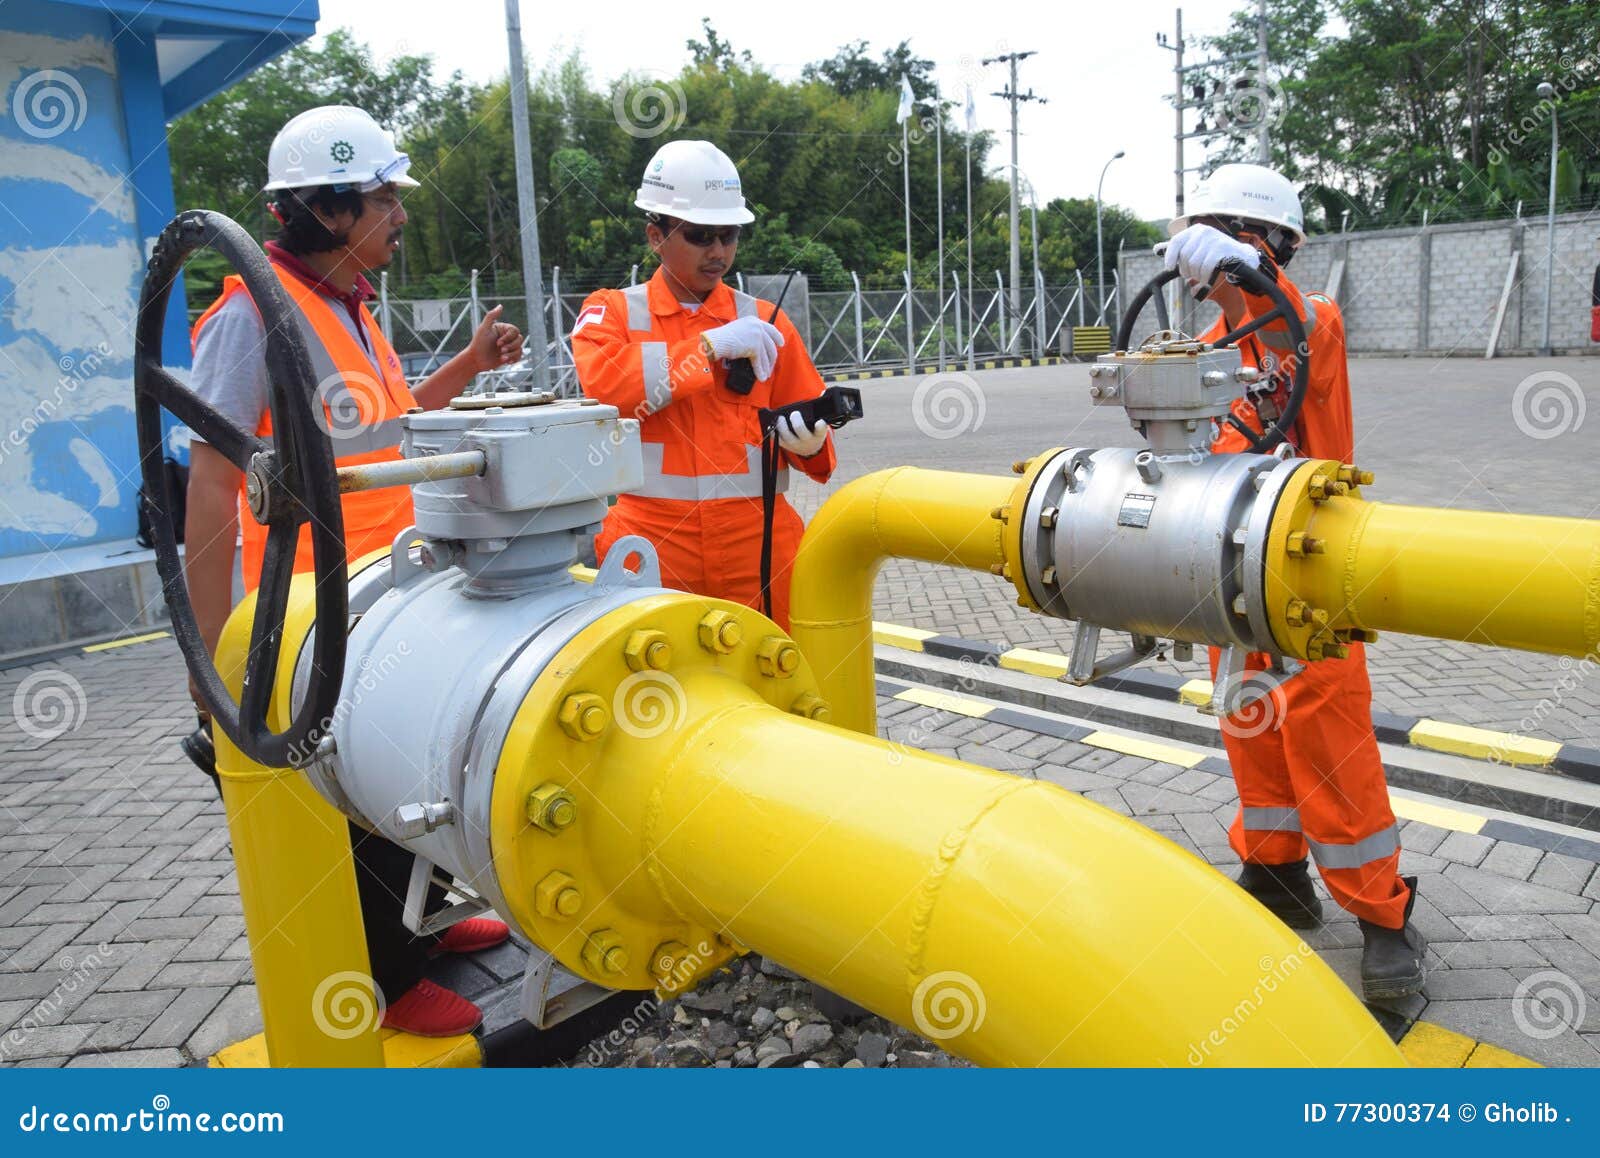 Pgn Expands Natural Gas Pipeline Infrastructure In Semarang Editorial Stock Image Image Of Completed Infrastructure 77300374